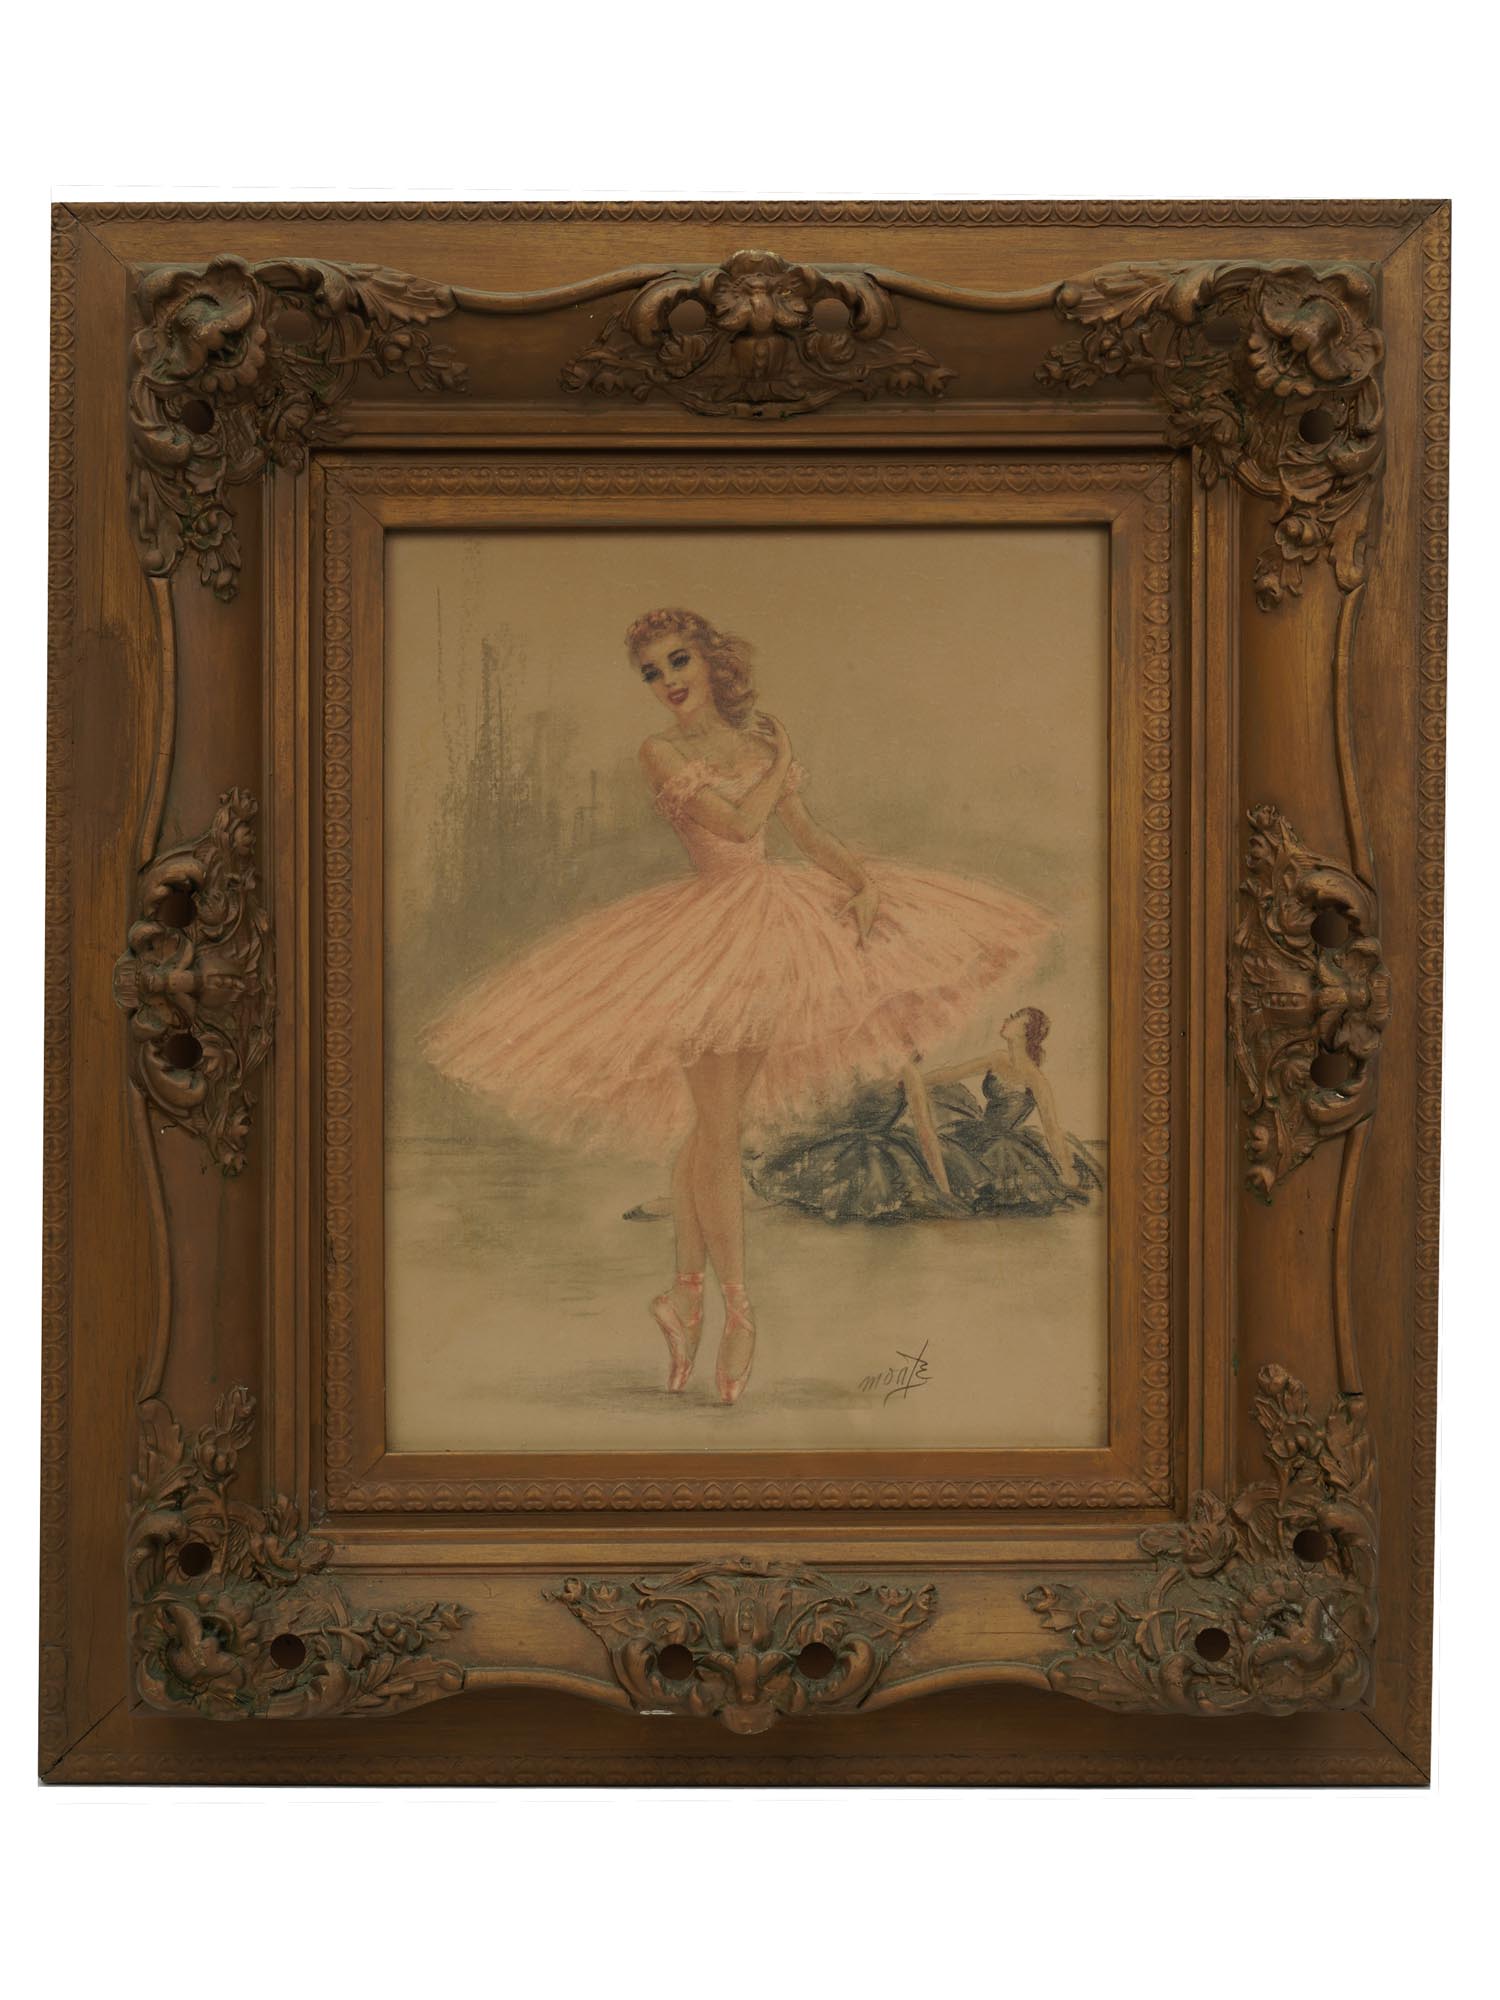 A VINTAGE LITHOGRAPH BALLERINA SIGNED BY MONTE